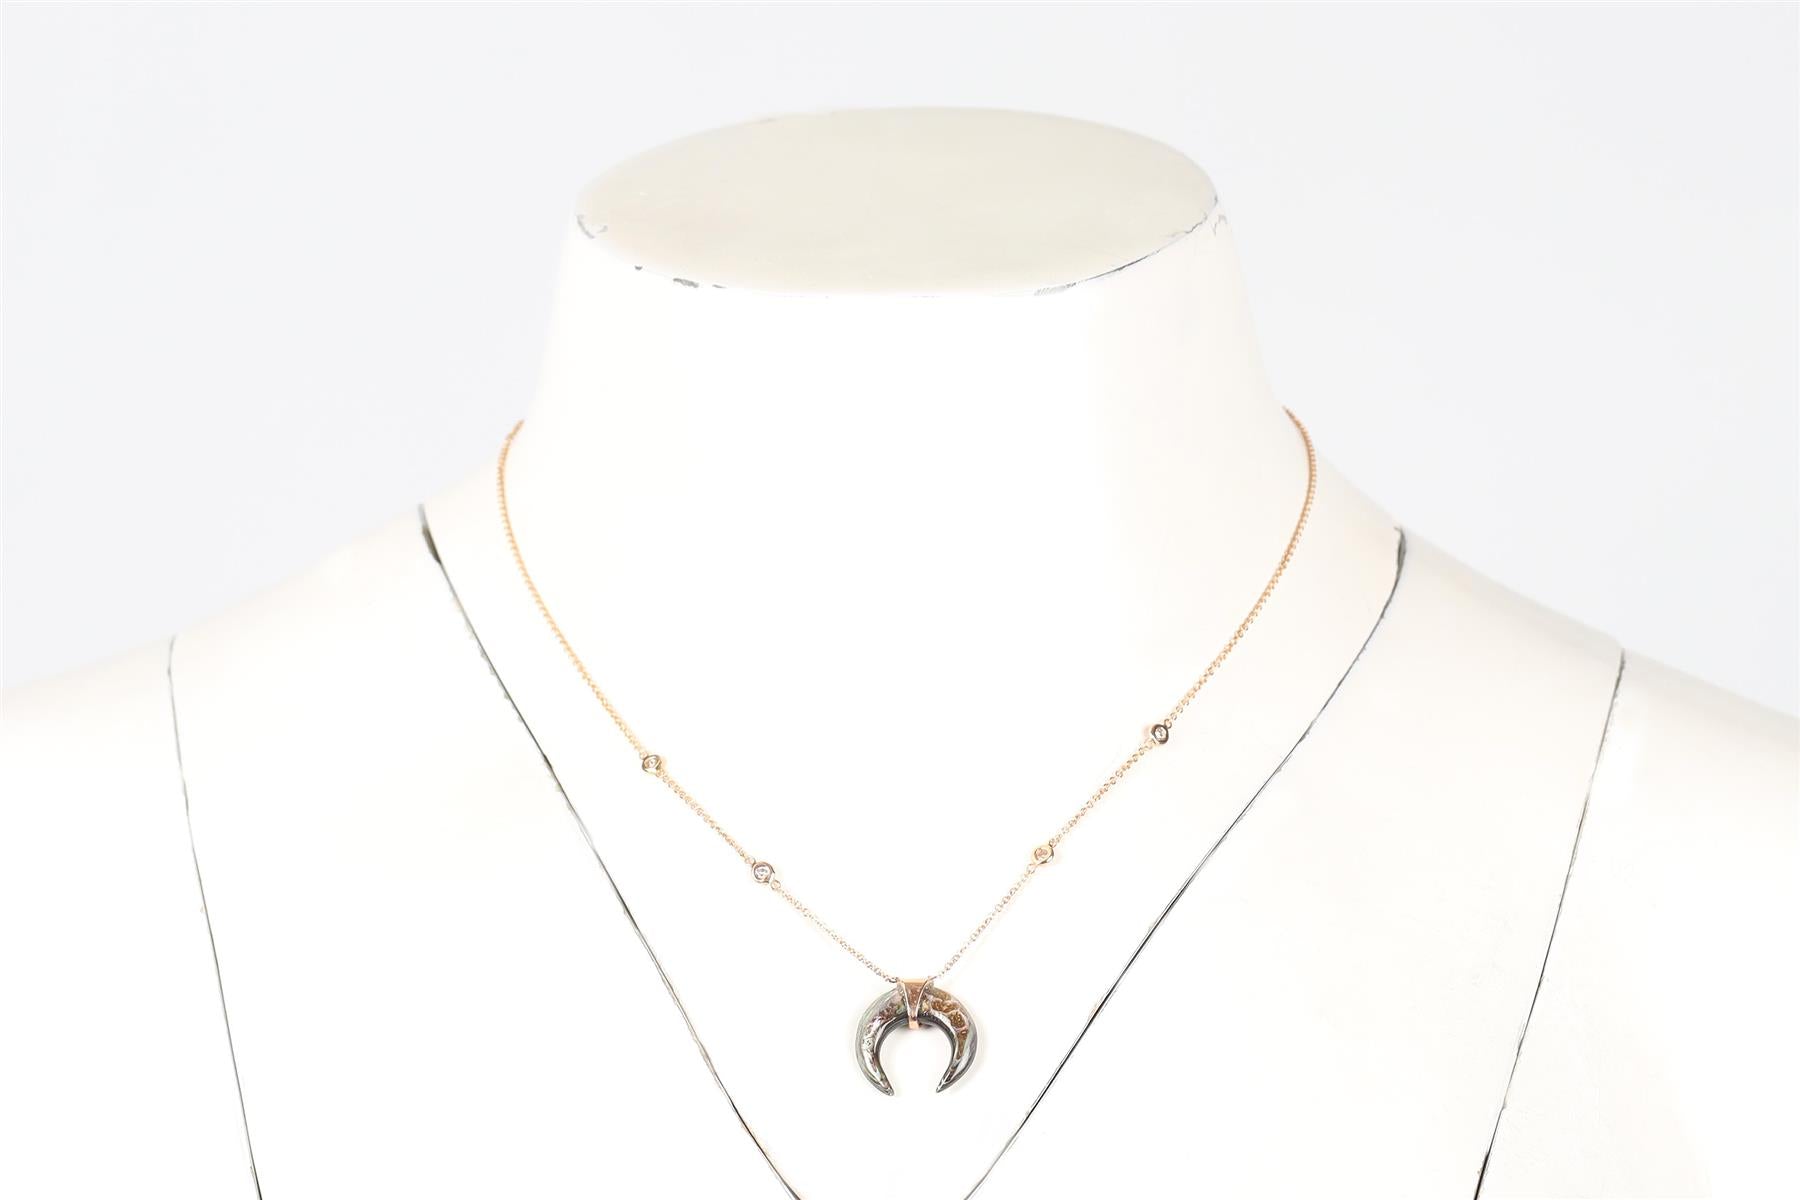 JACQUIE AICHE DOUBLE HORN 14K ROSE GOLD, ABALONE AND PAVE DIAMOND NECKLACE